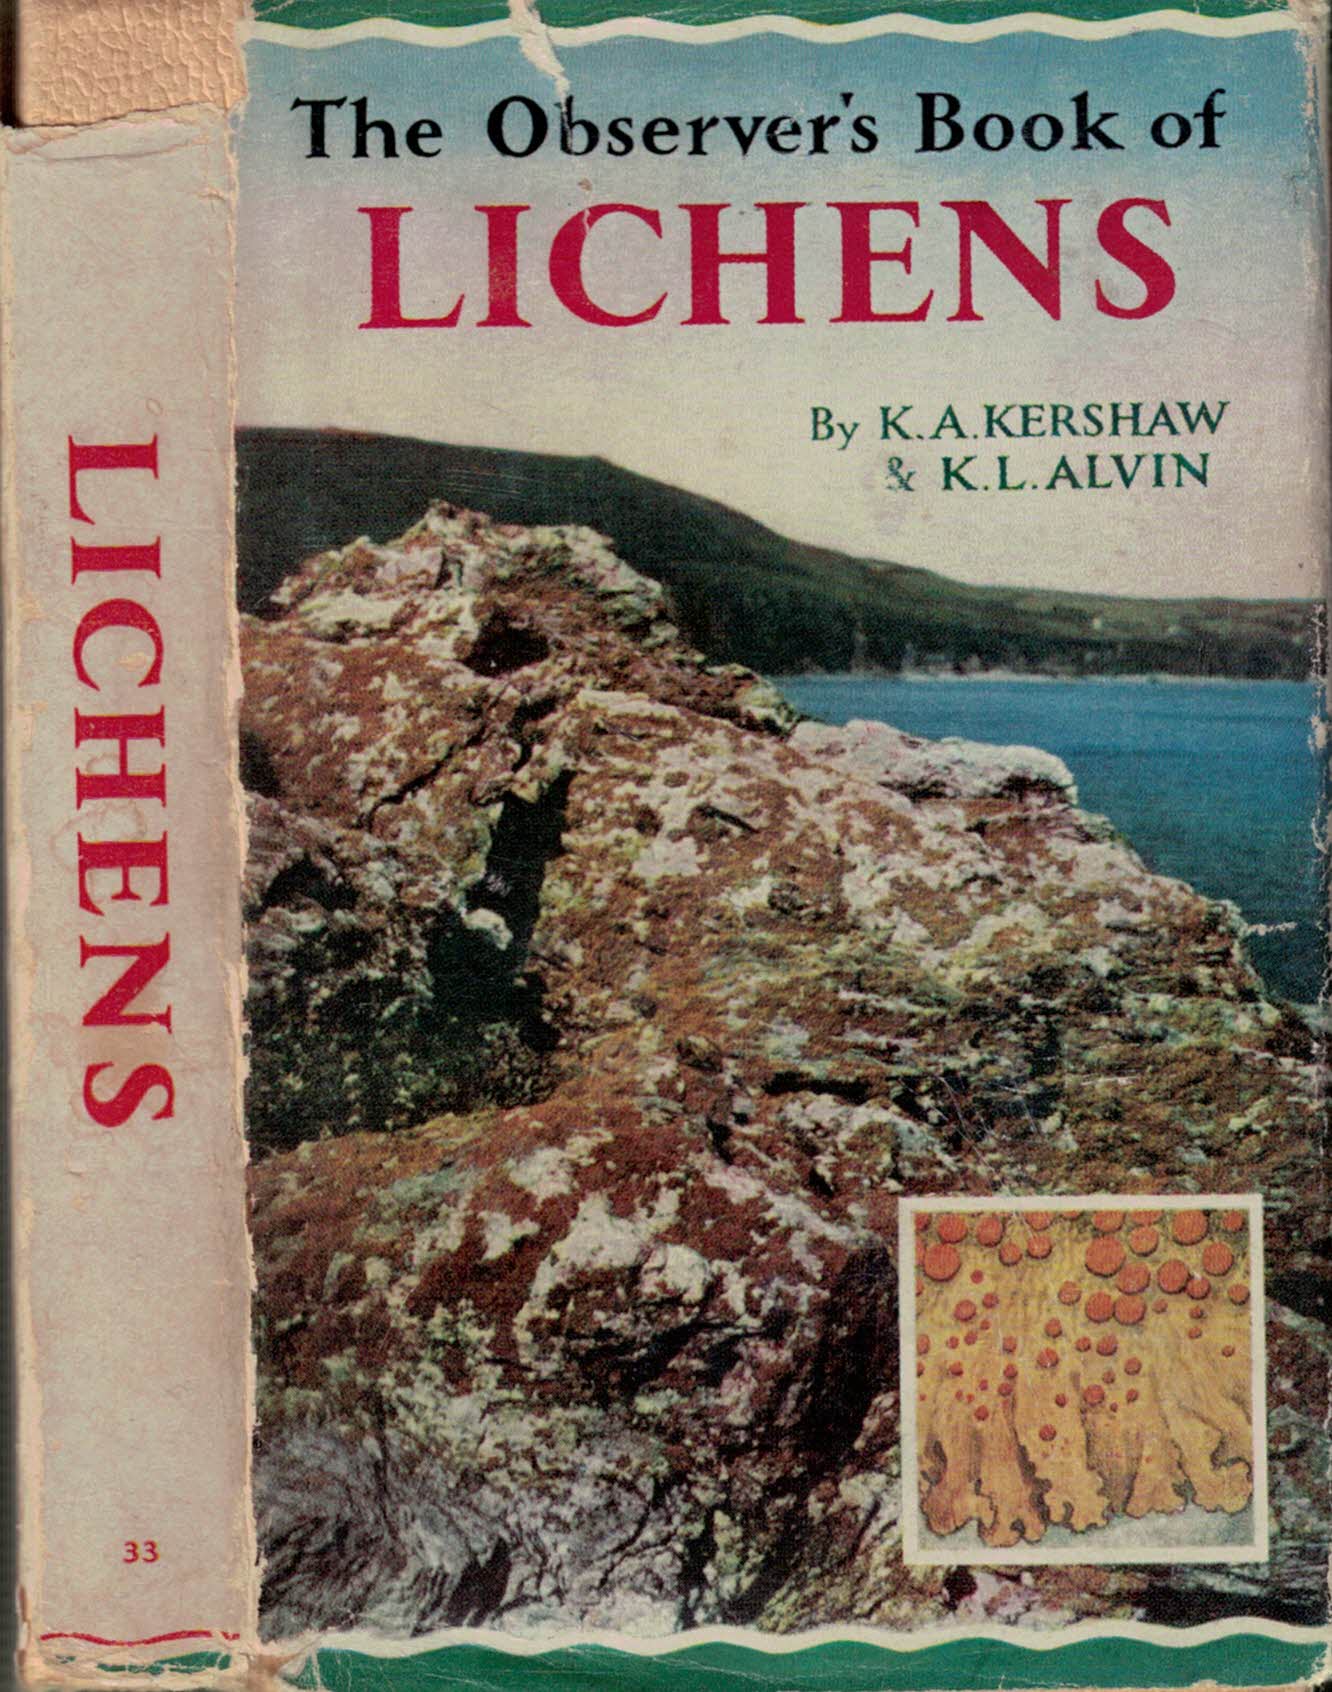 The Observer's Book of Lichens. 1963.